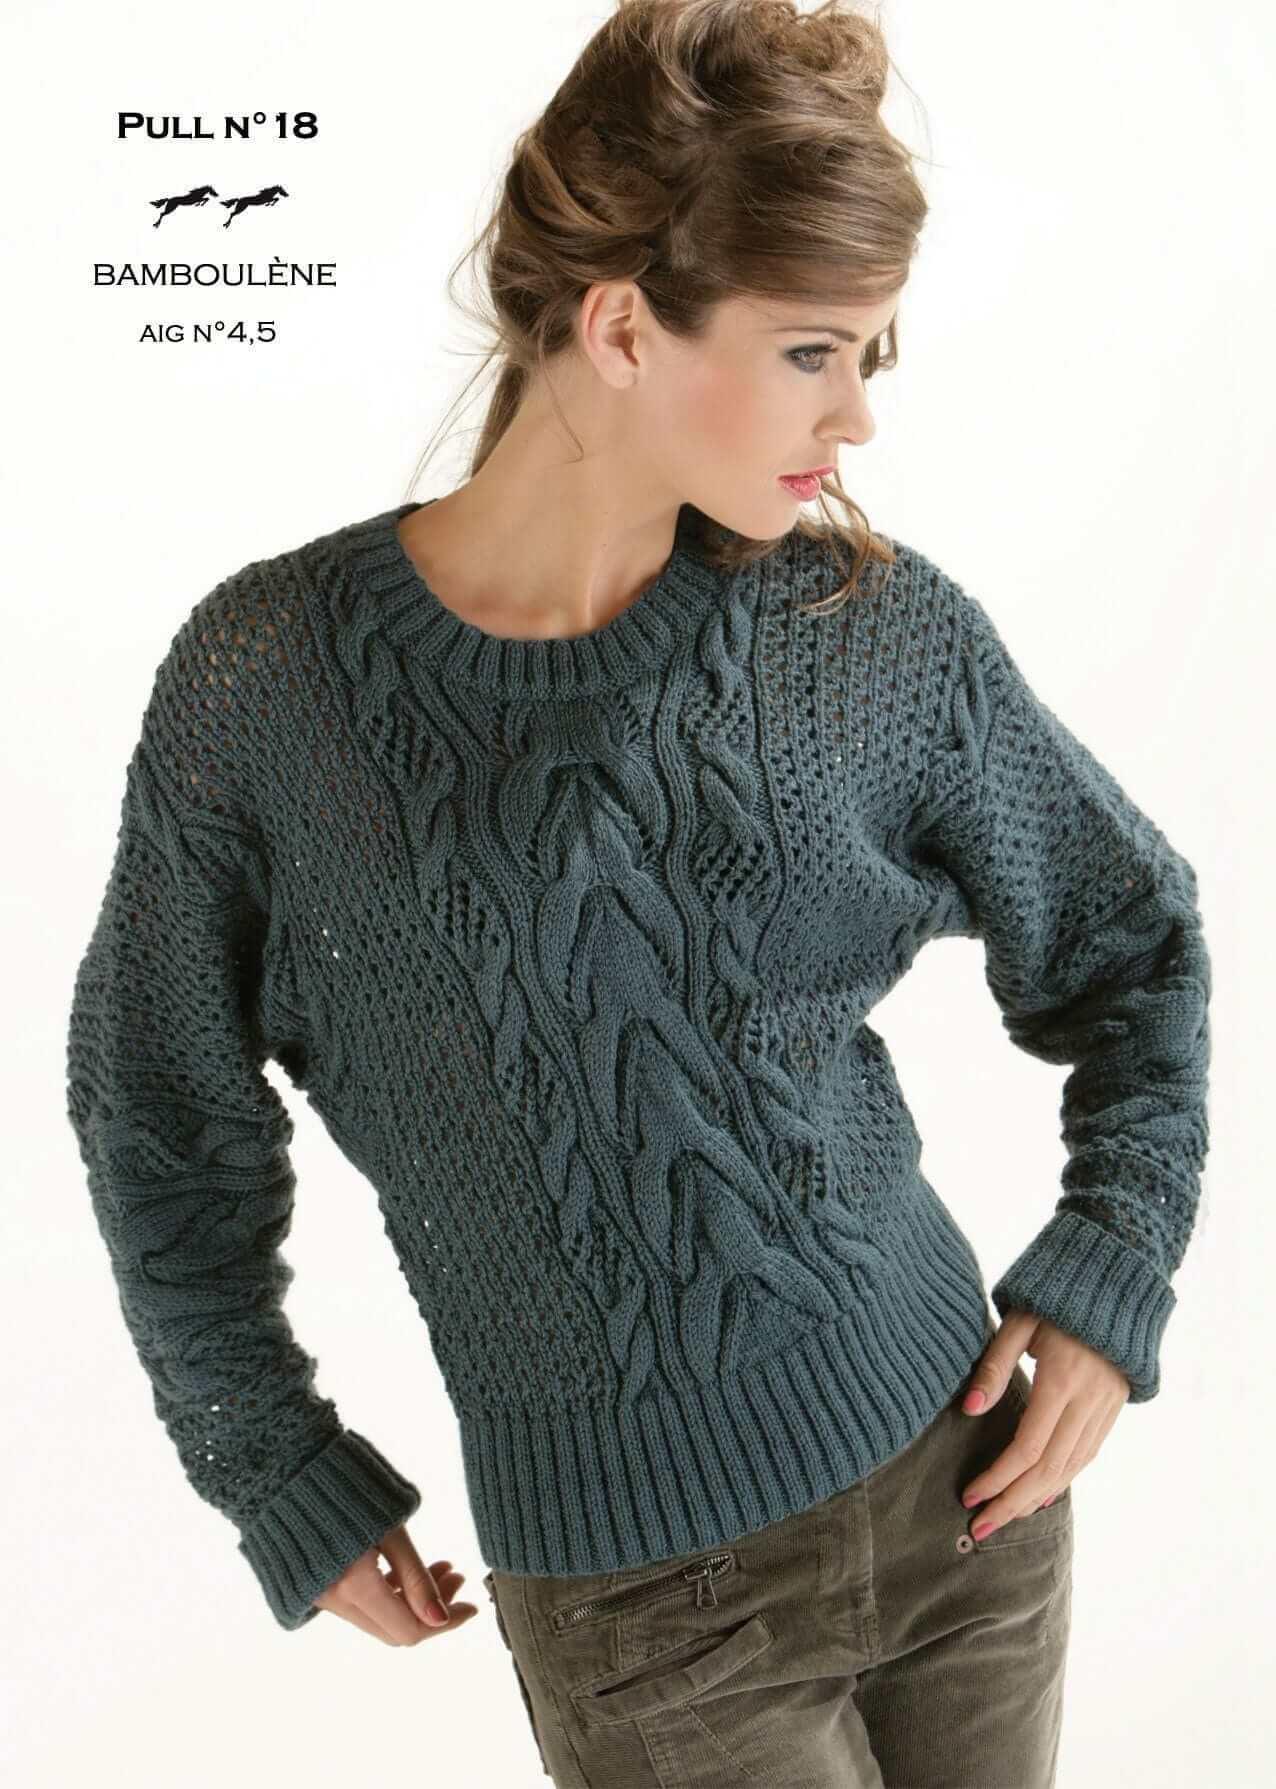 Knitting patterns top for women - Cheval Blanc - Laines Cheval Blanc